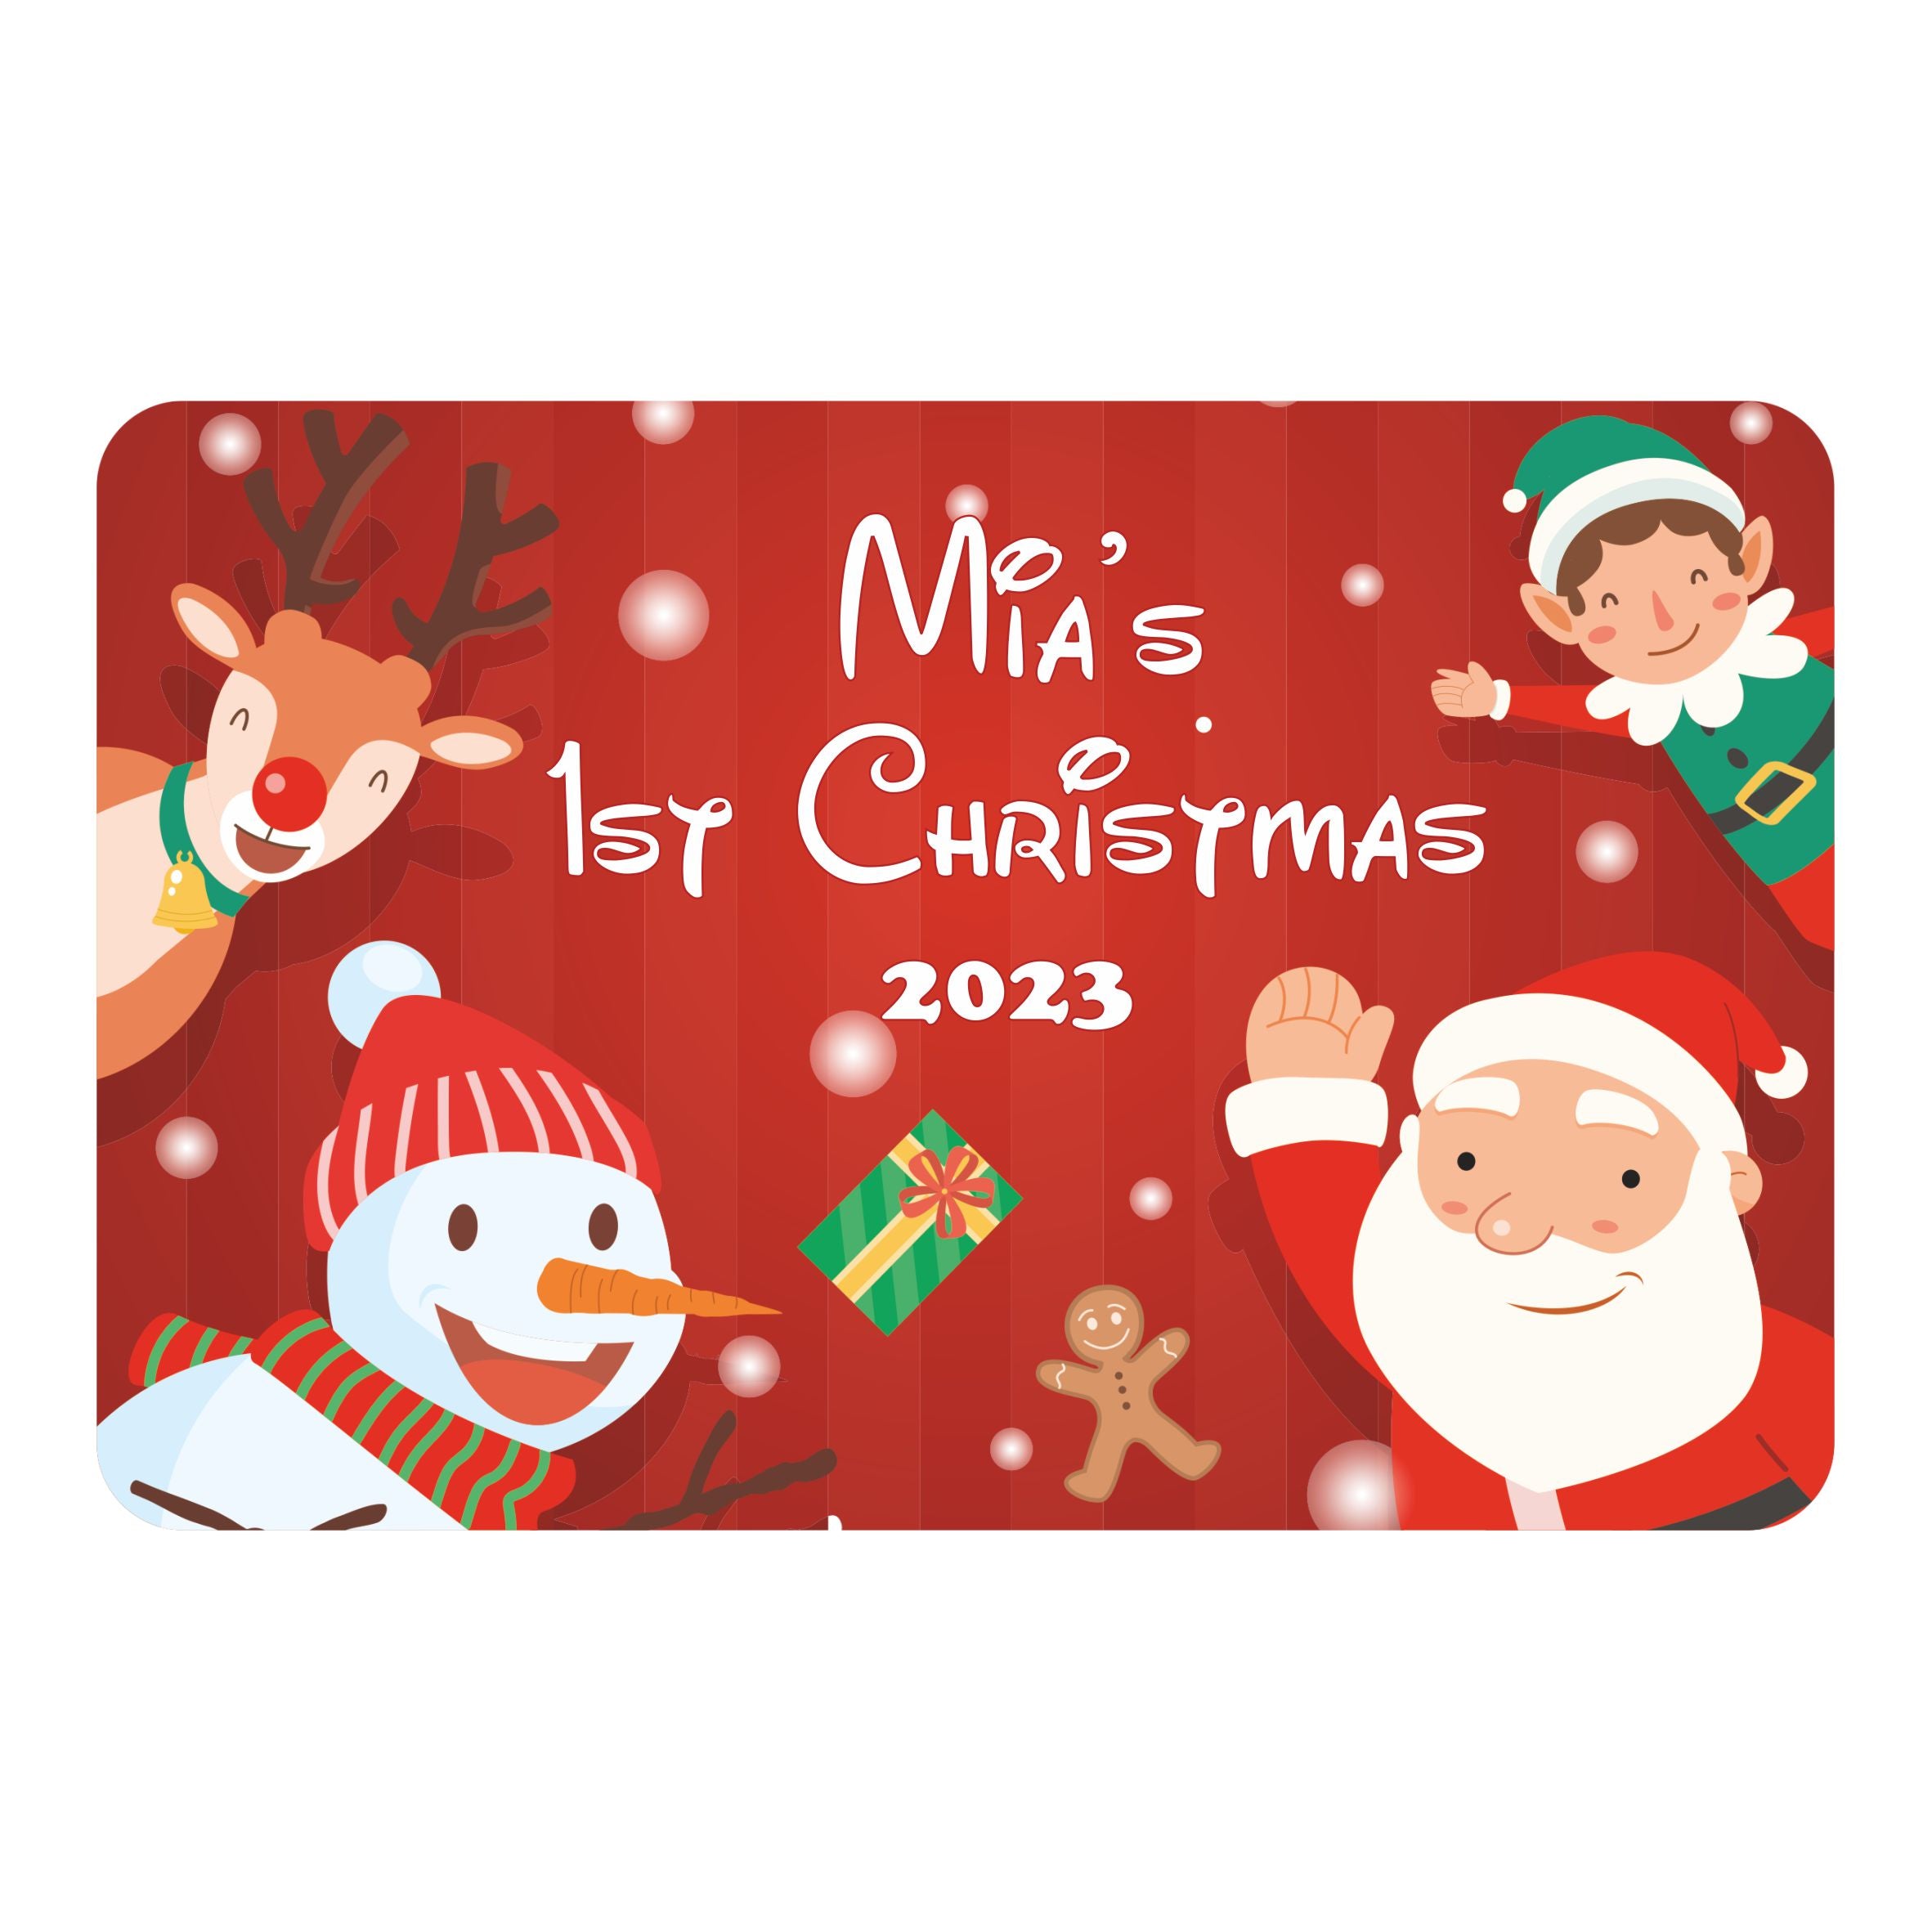 Christmas-No1 Sign / Gift Tag- Adult / Kids Custom Designed Printed with Any Name - Ideal as a Gift Tag